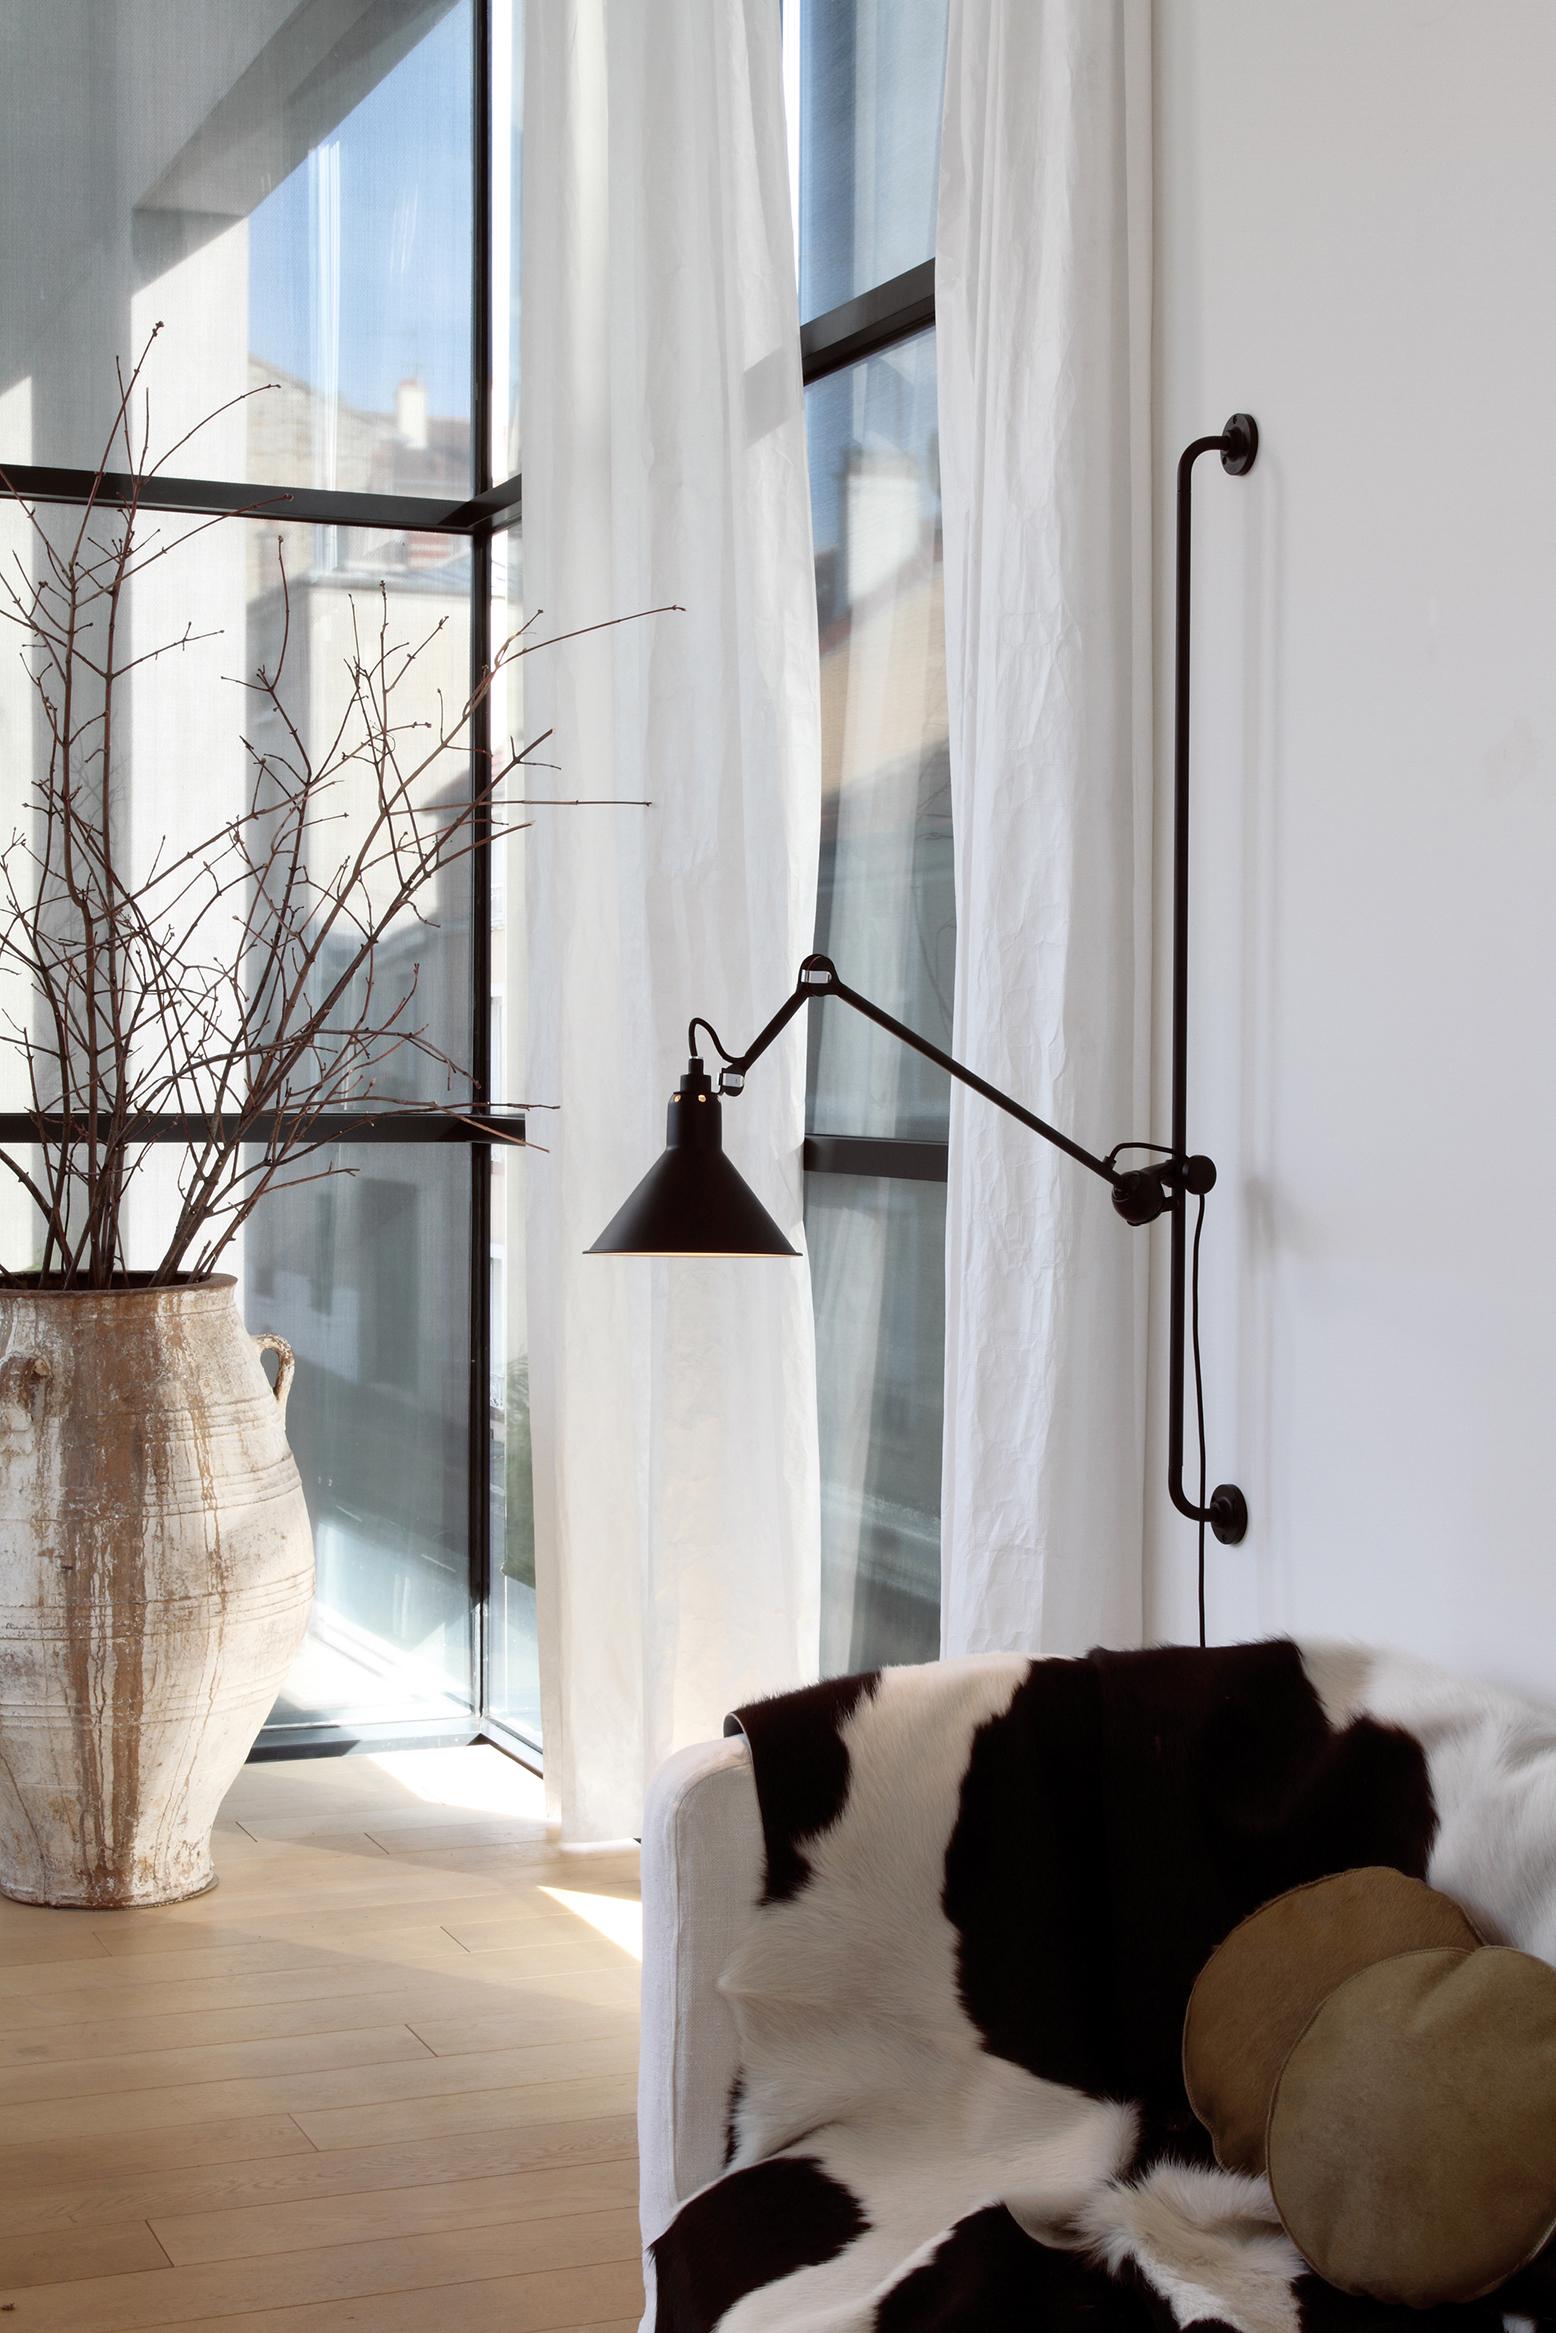 1921, before ever becoming a design, the GRAS lamp started out as an idea. It is the first articulated lamp in the history of lighting. Invented specifically as a light for working by, nowadays it fits seamlessly into any domestic environment.
Form